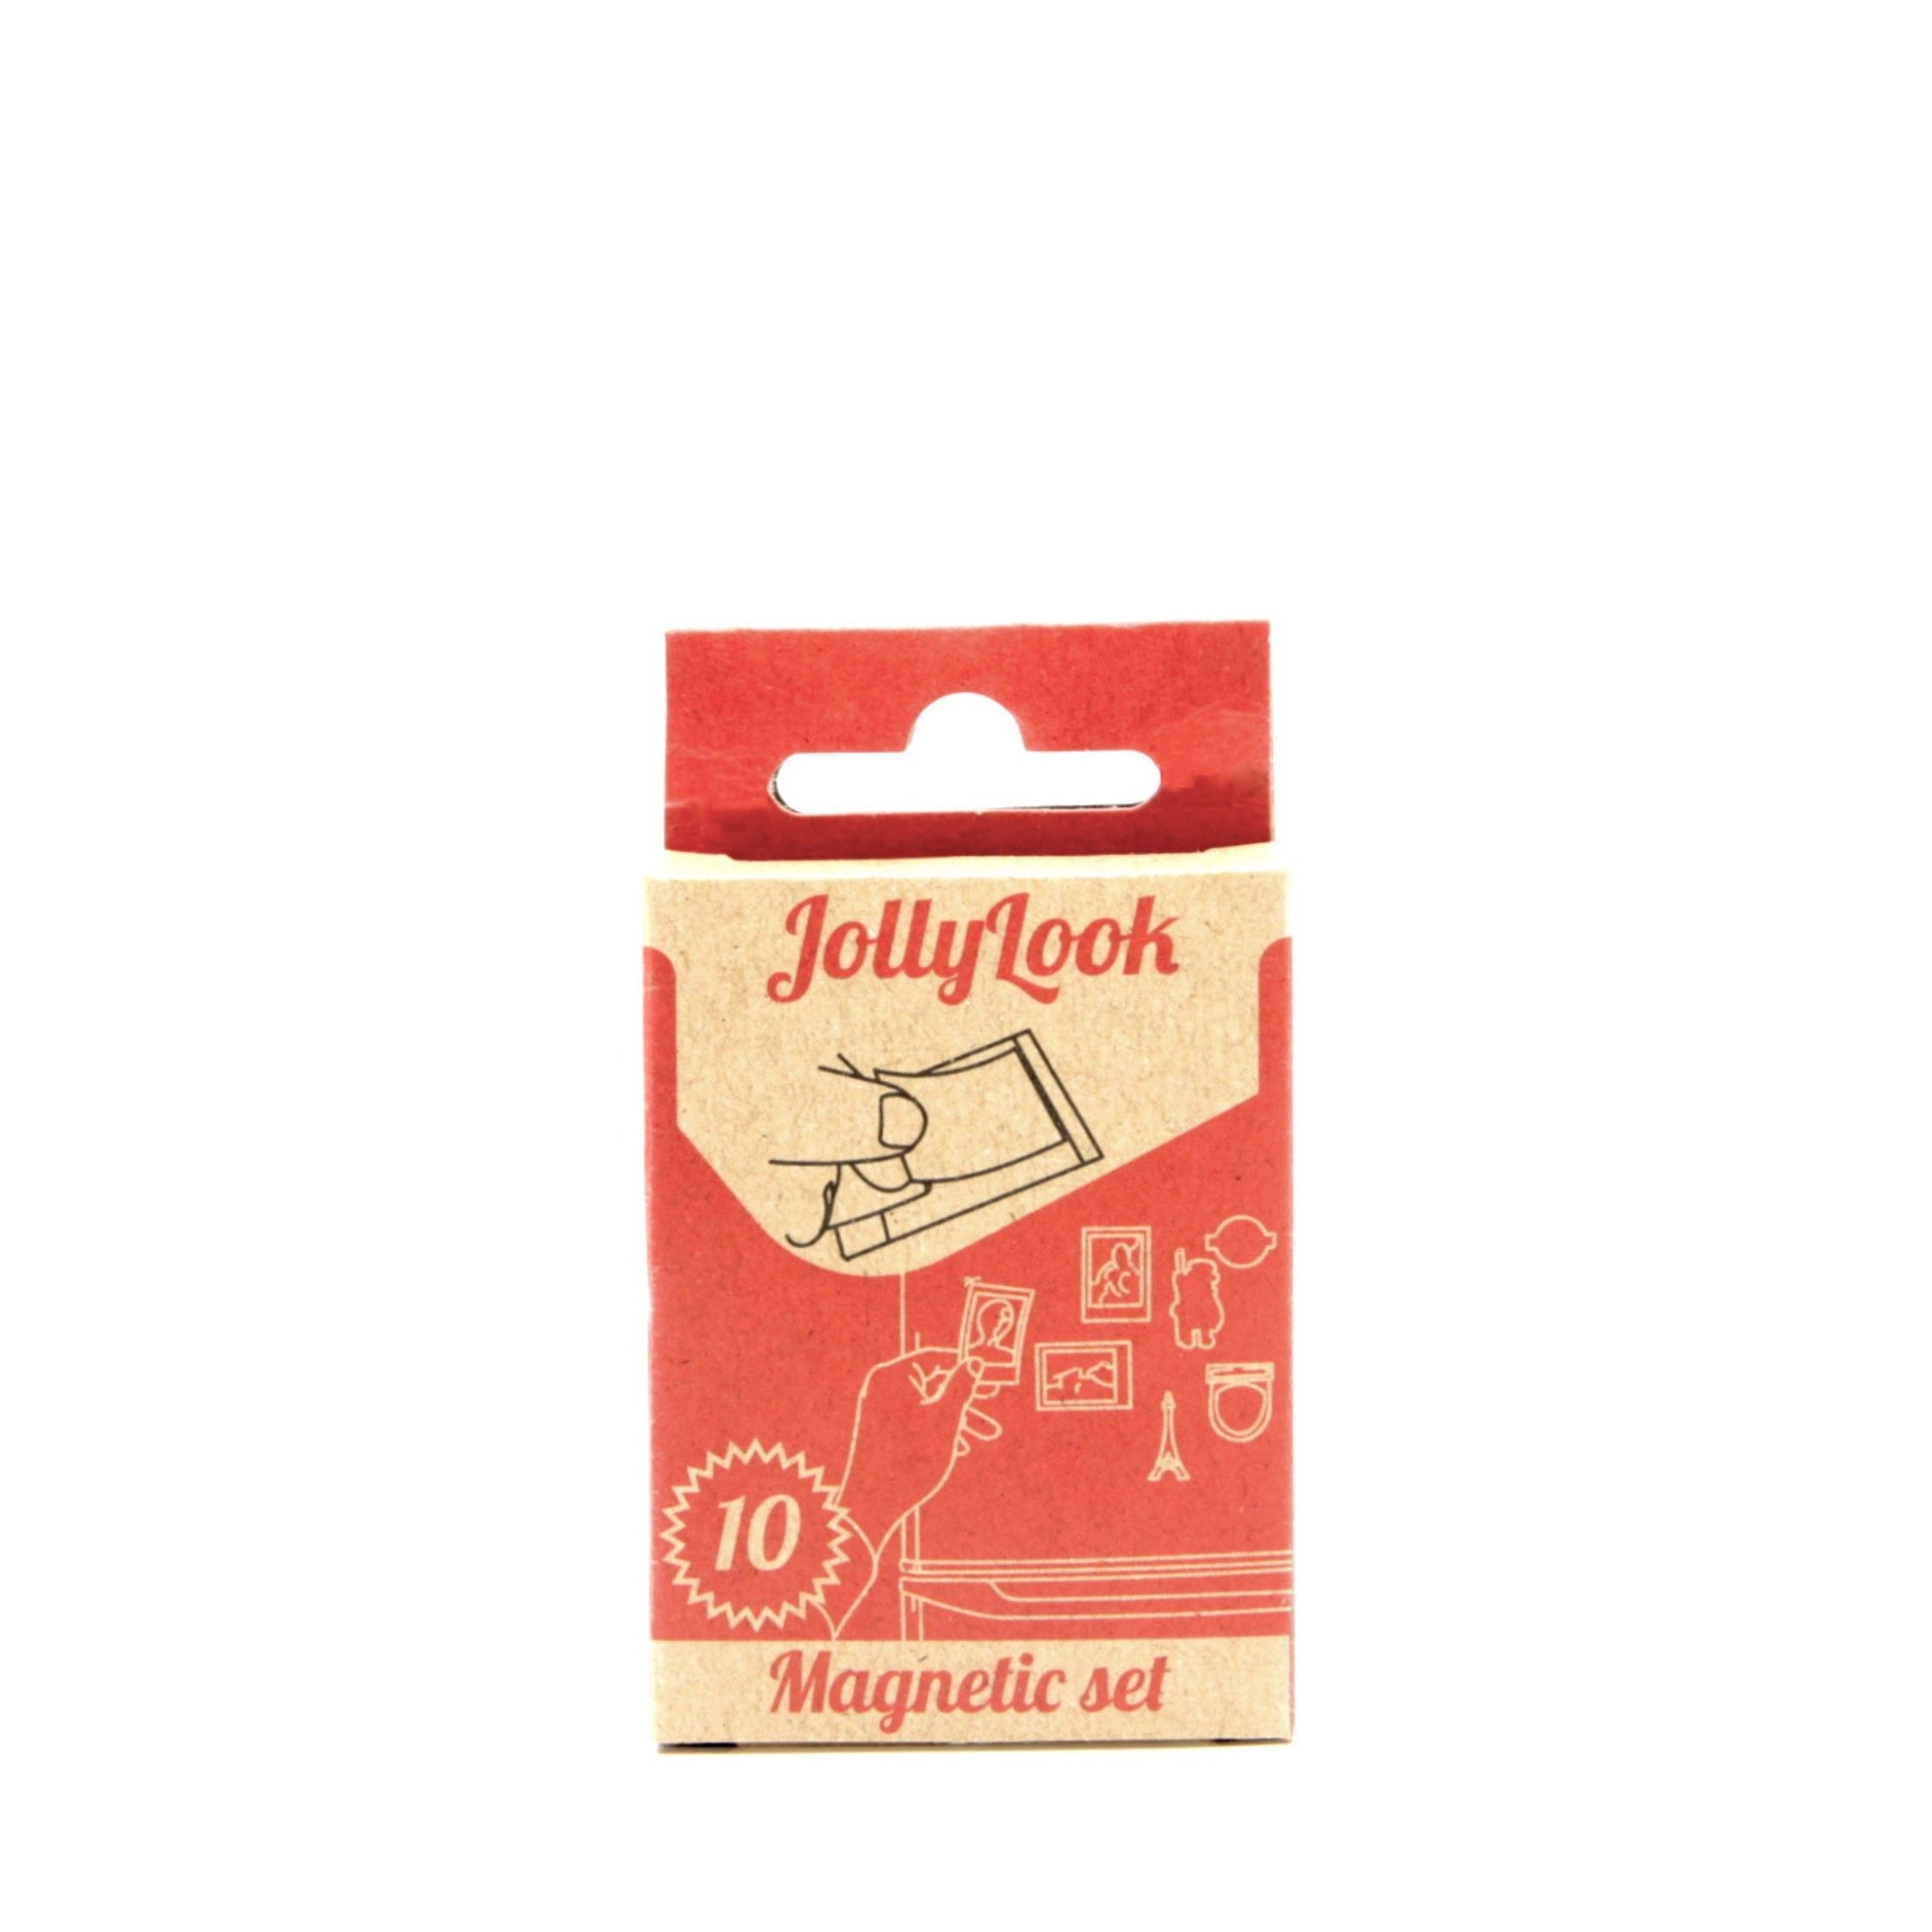 Set of 10 Jollylook Mini Magnet Tape for instant photos.